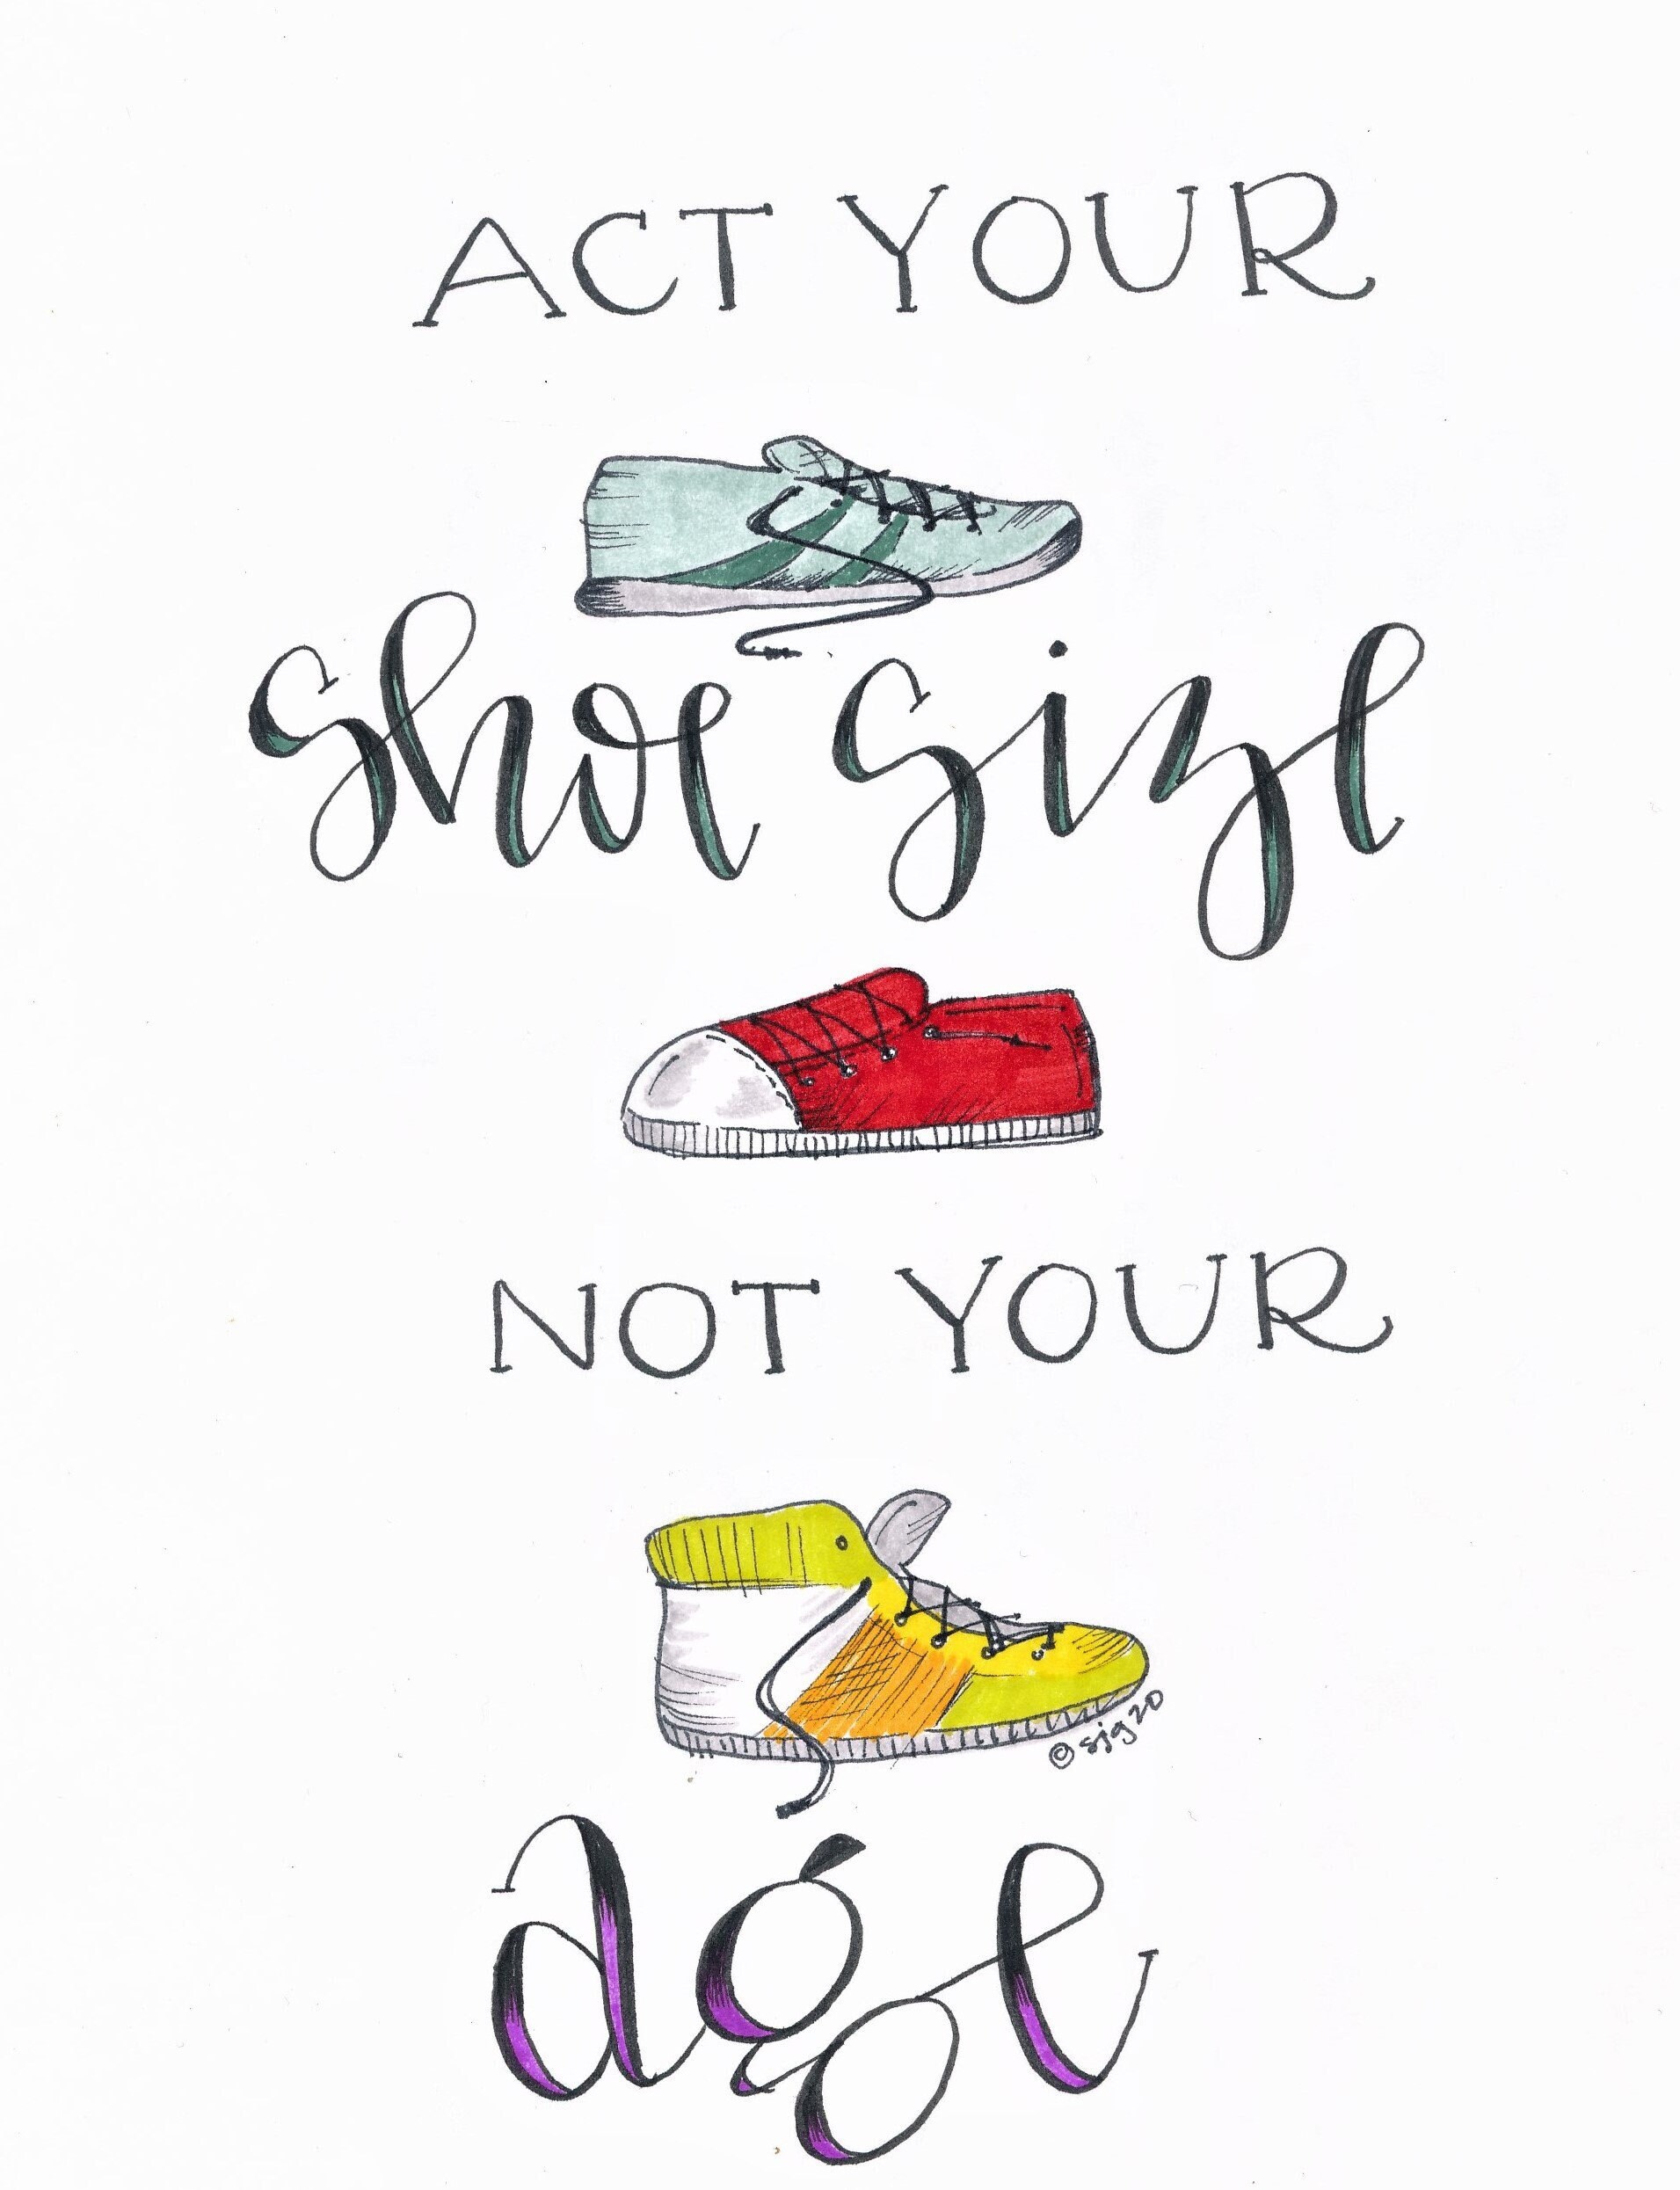 Act Your Age Not Your Shoe Size synonyms - 74 Words and Phrases